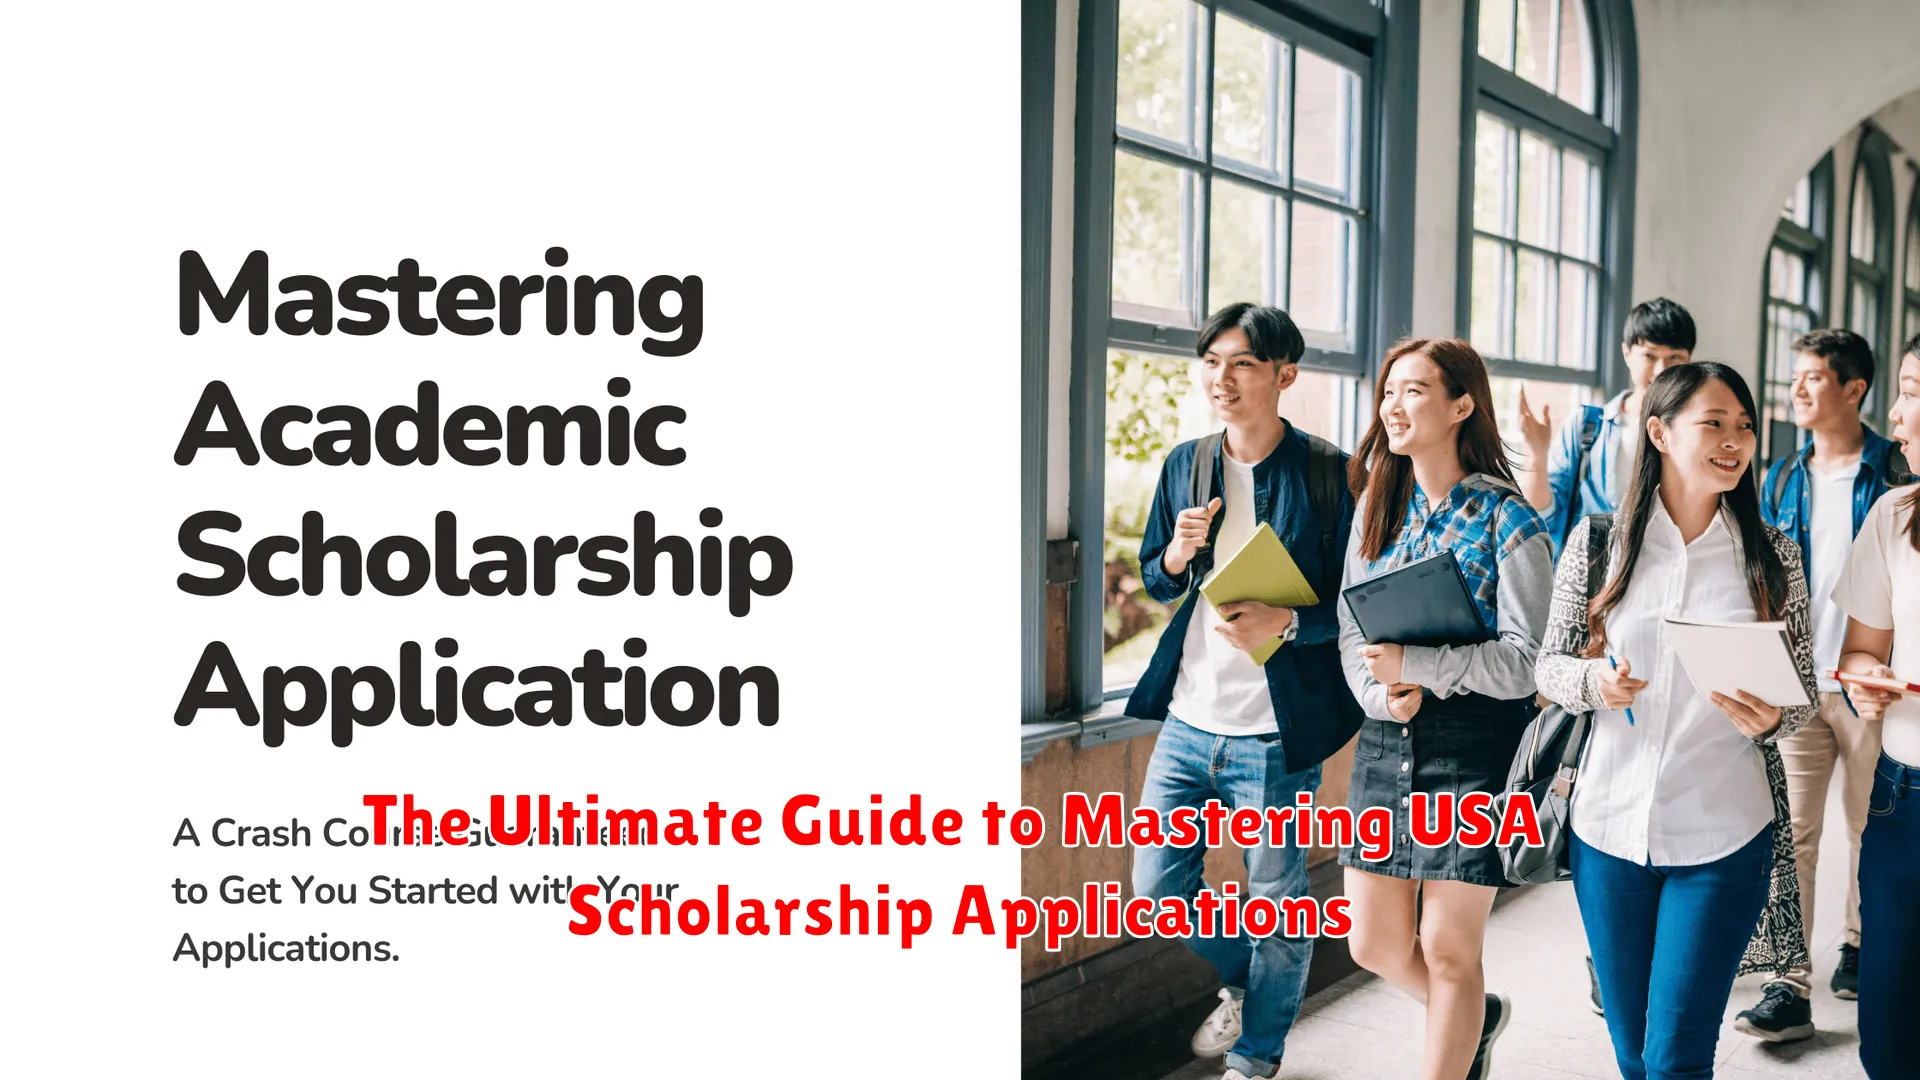 The Ultimate Guide to Mastering USA Scholarship Applications